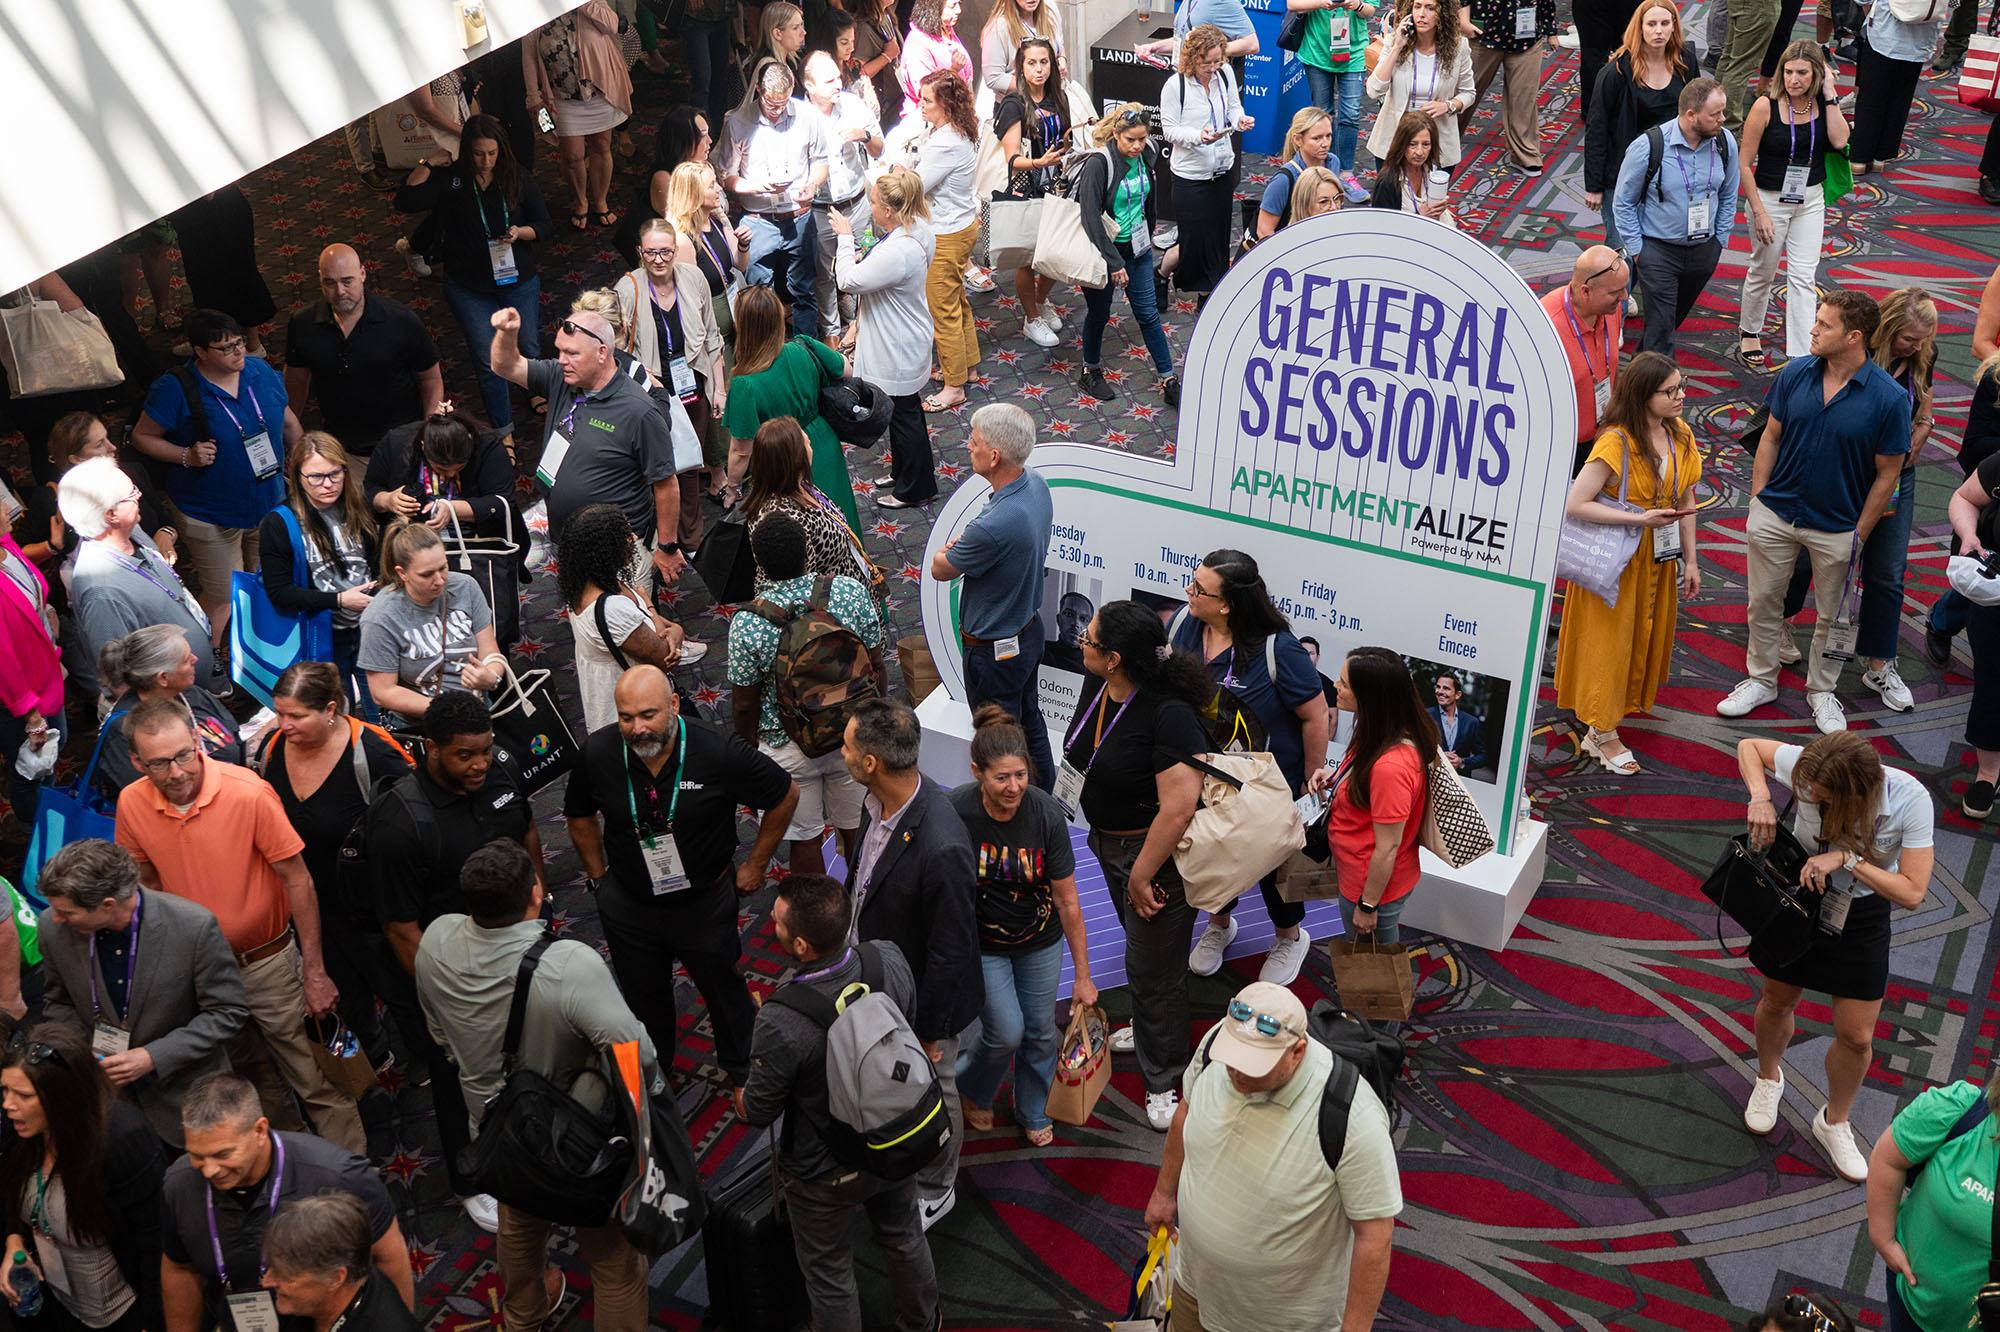 Attendees eagerly wait the opening of the doors for Friday’s Closing General Session at Apartmentalize.